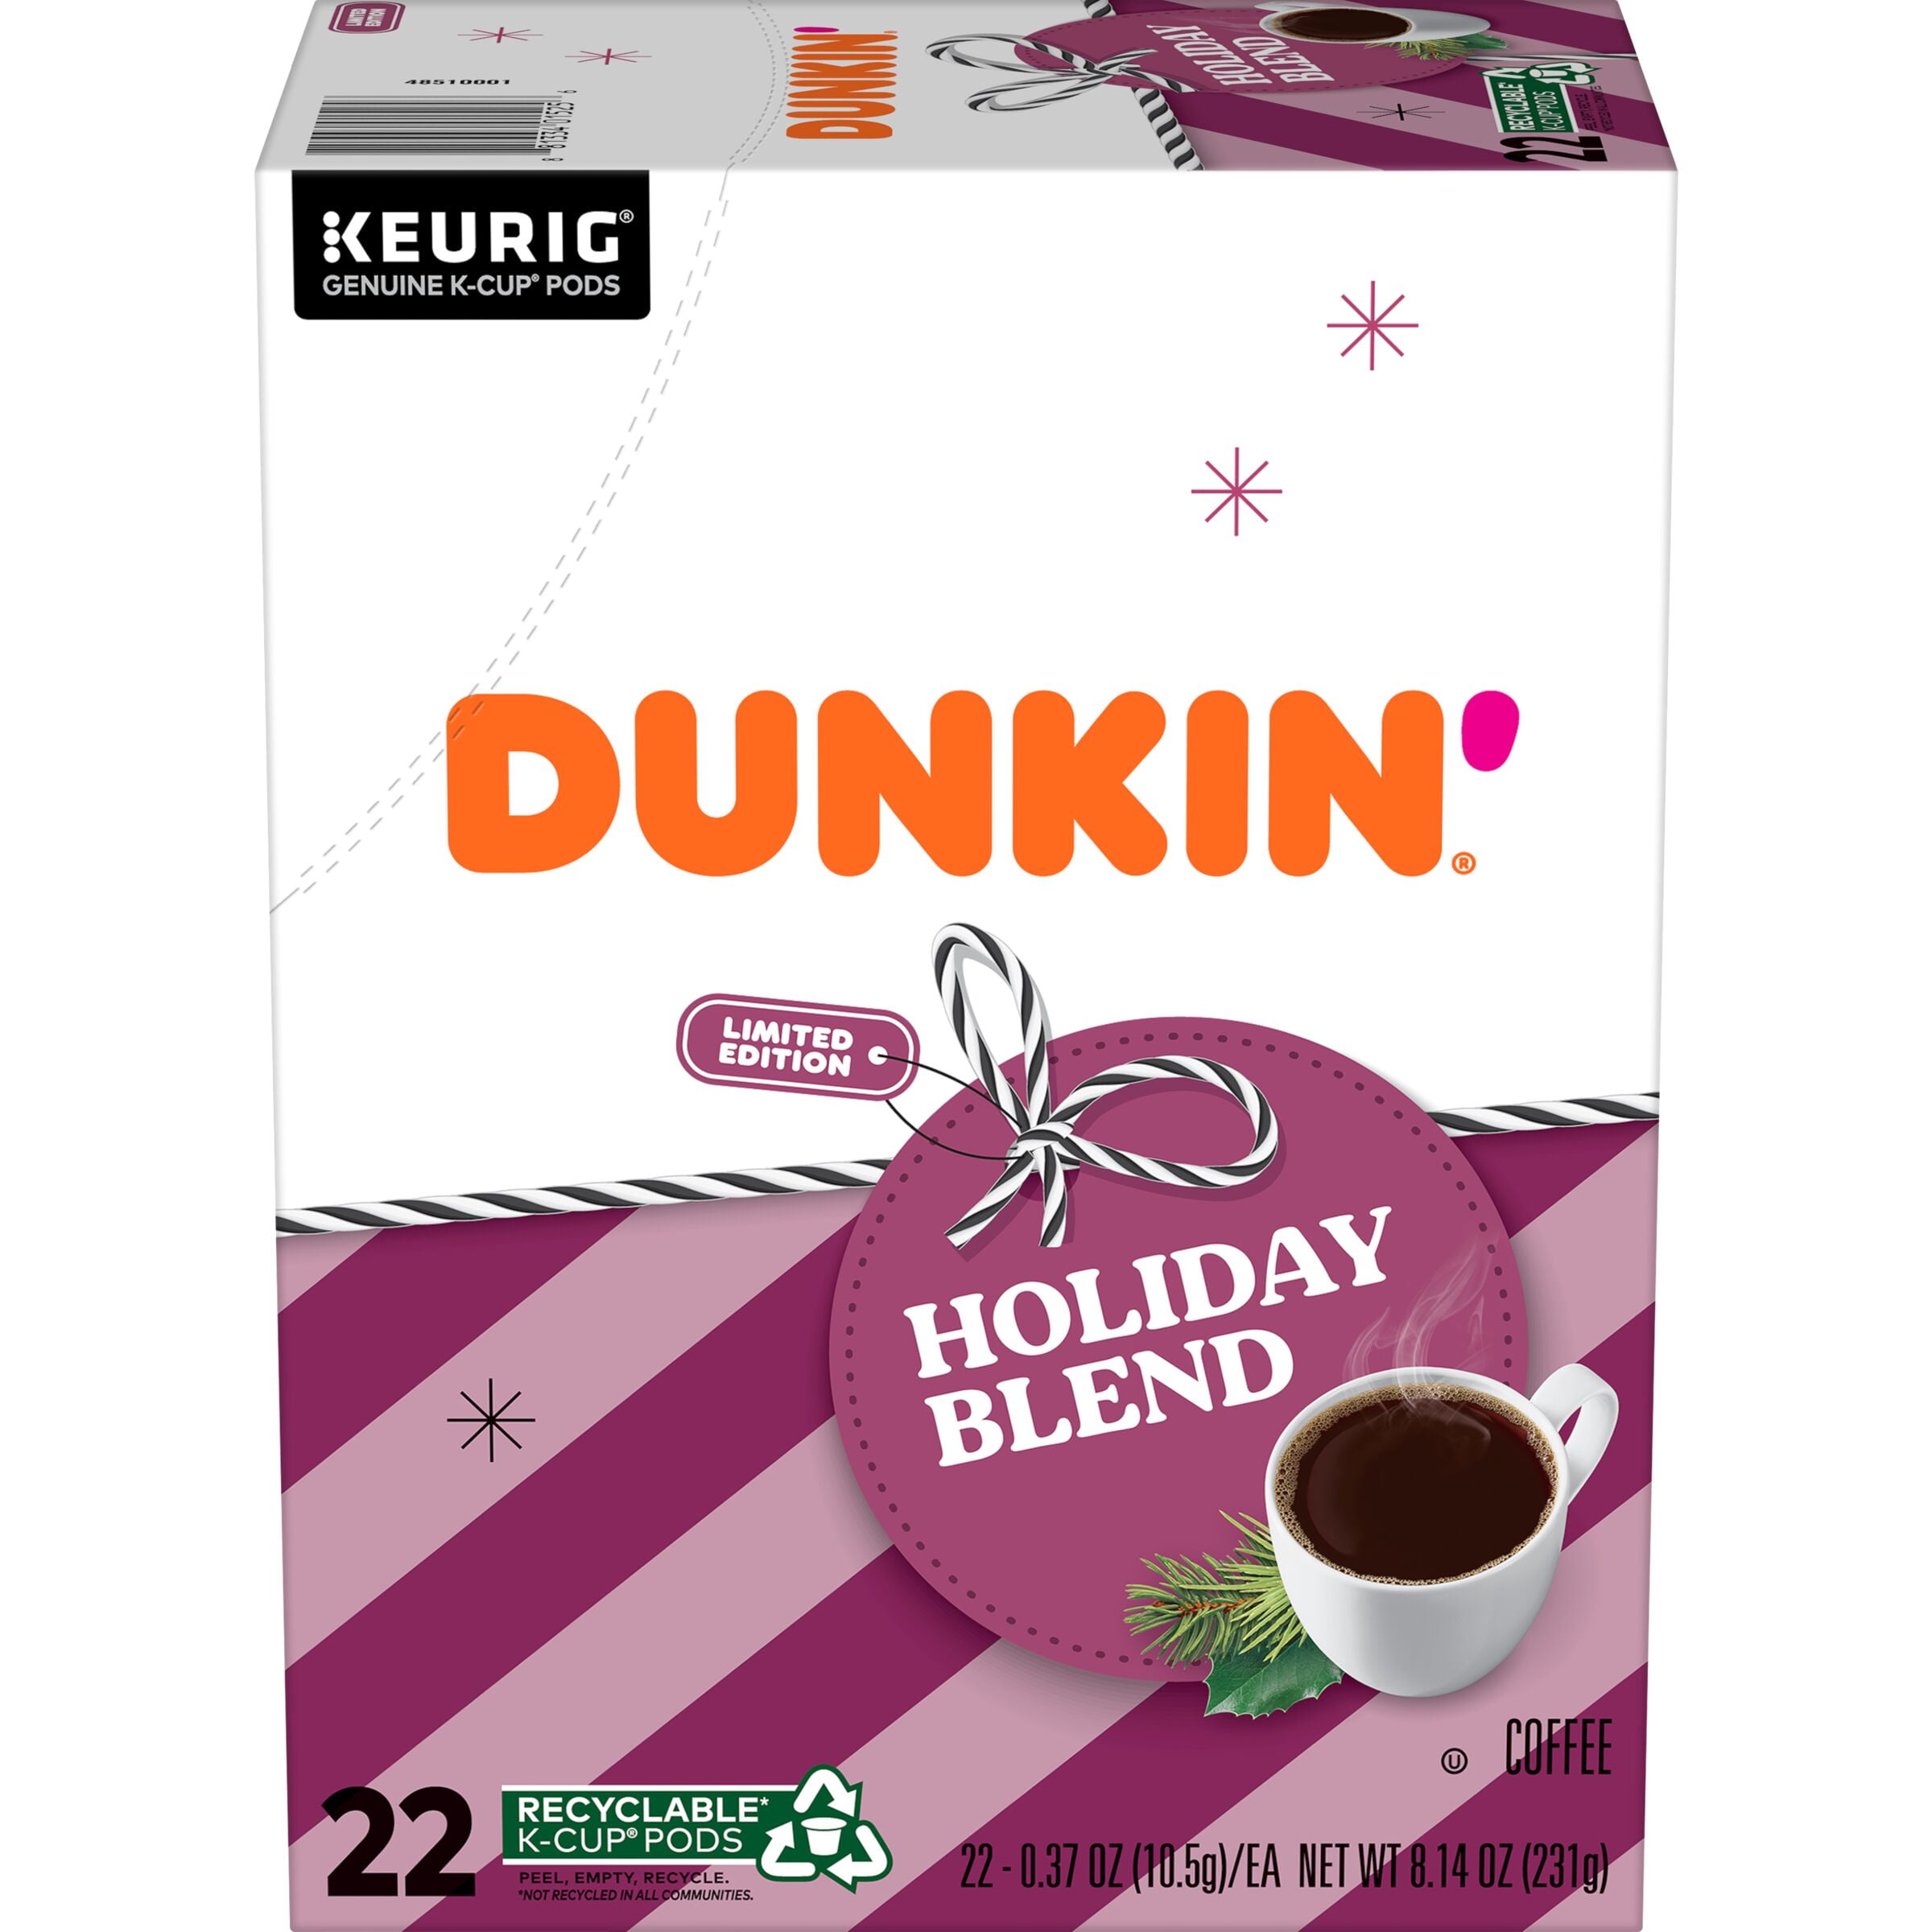 Dunkin' Dunkin Holiday Blend Coffee, Keurig K-Cup Pods, 22ct.